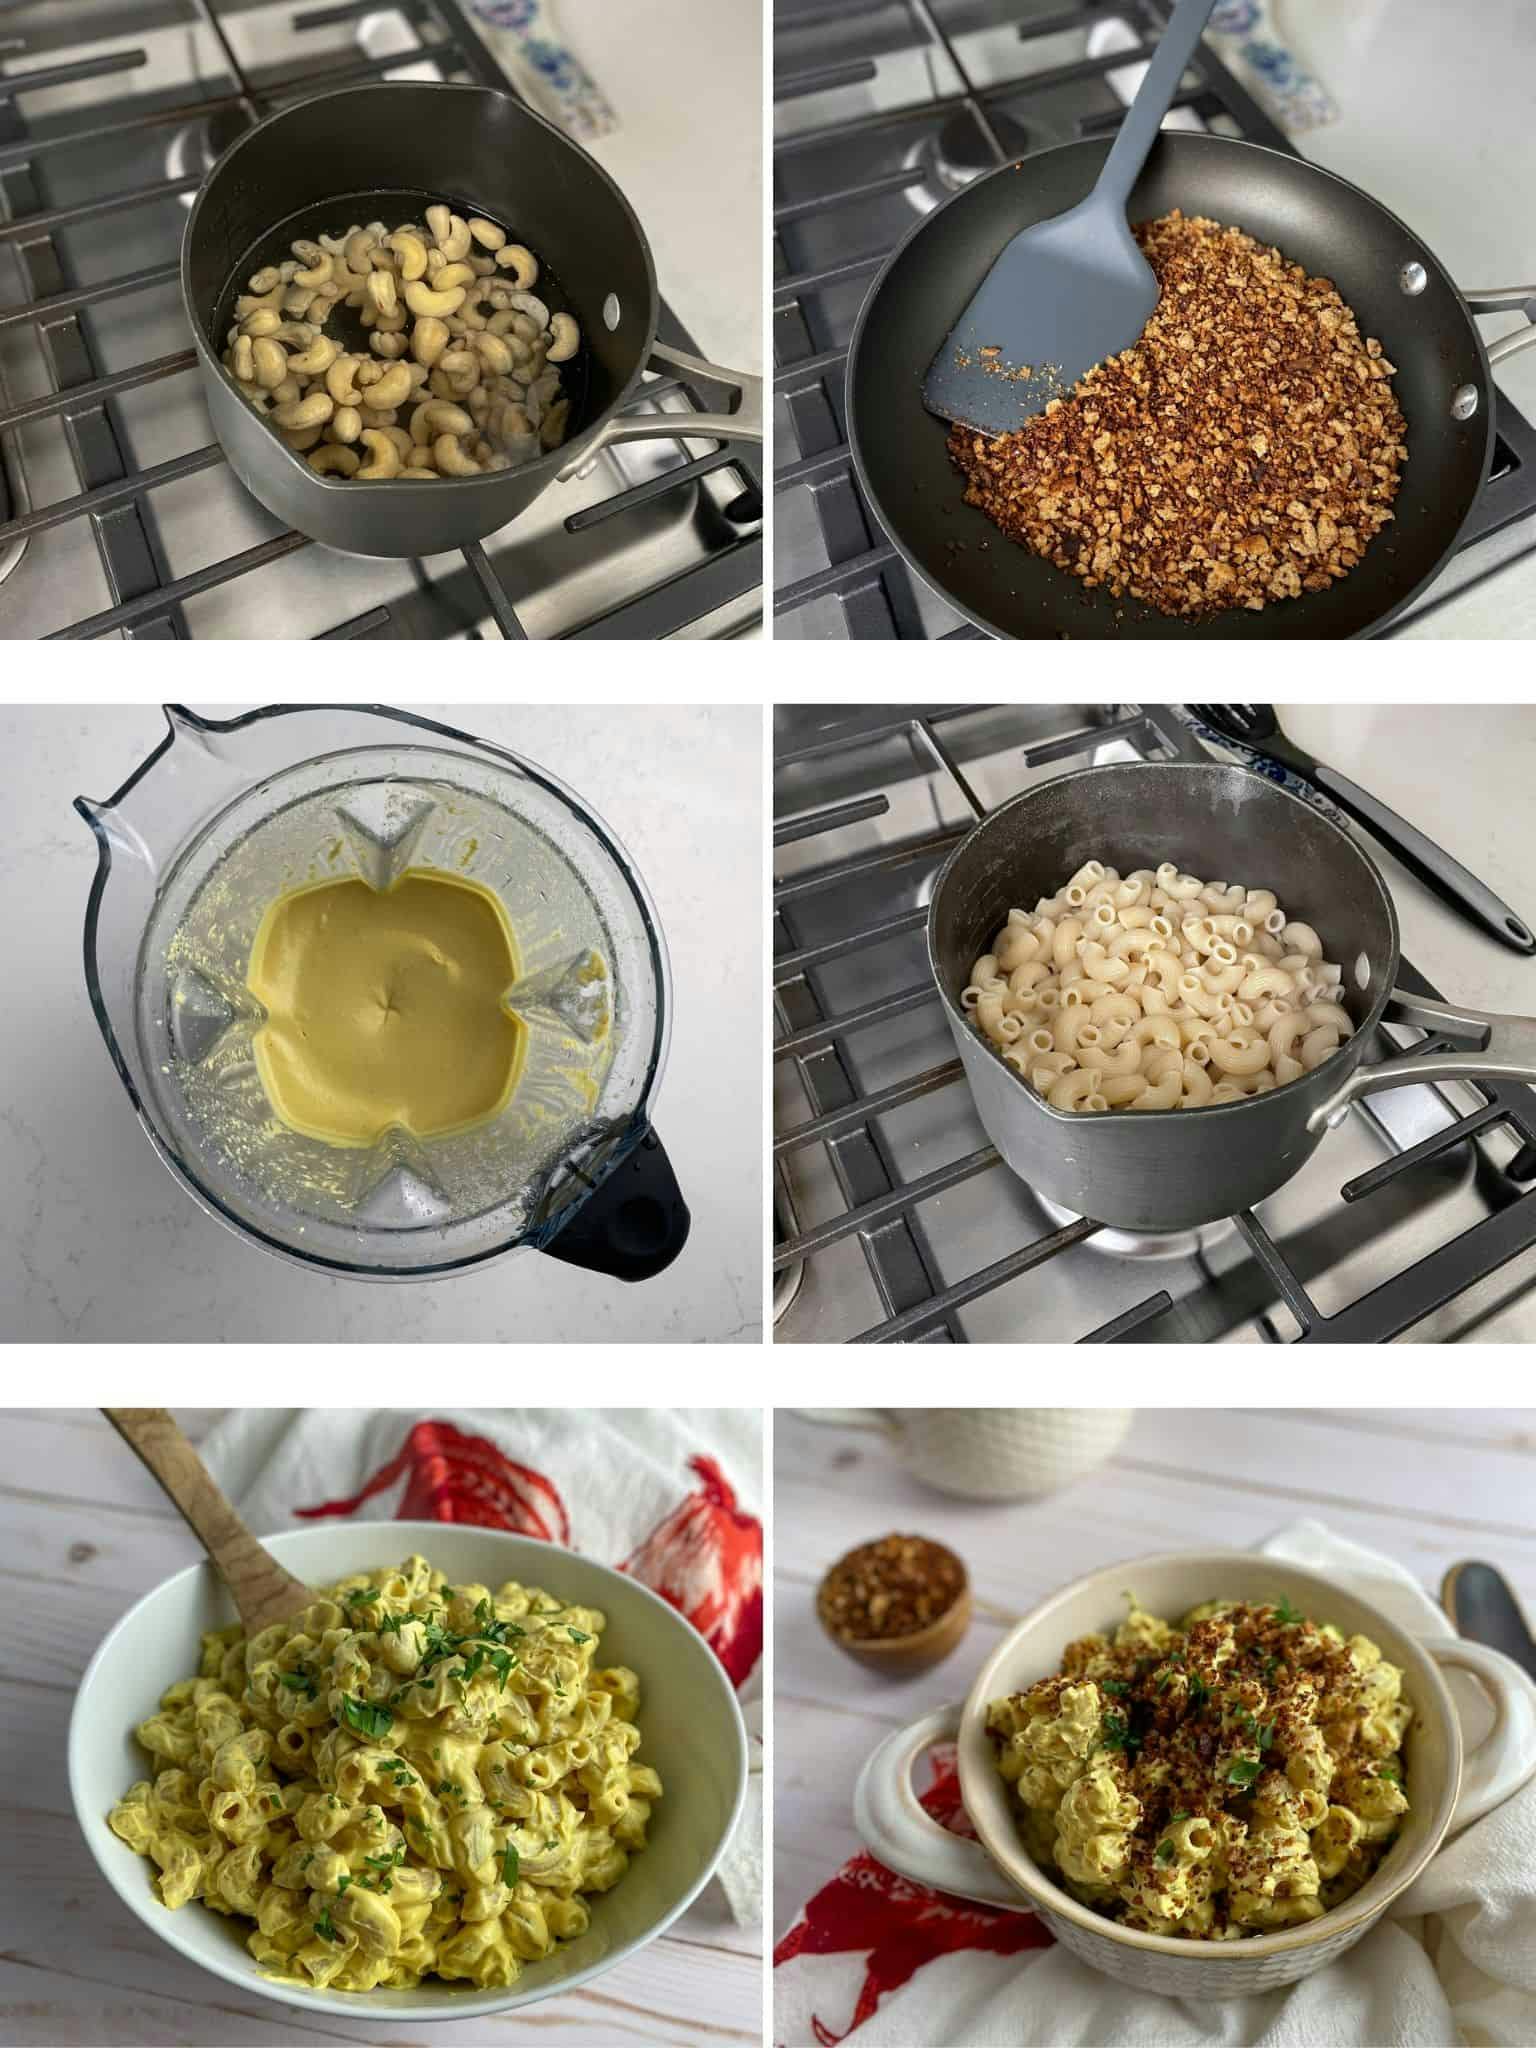 Grid of images showing steps to make the mac and cheese